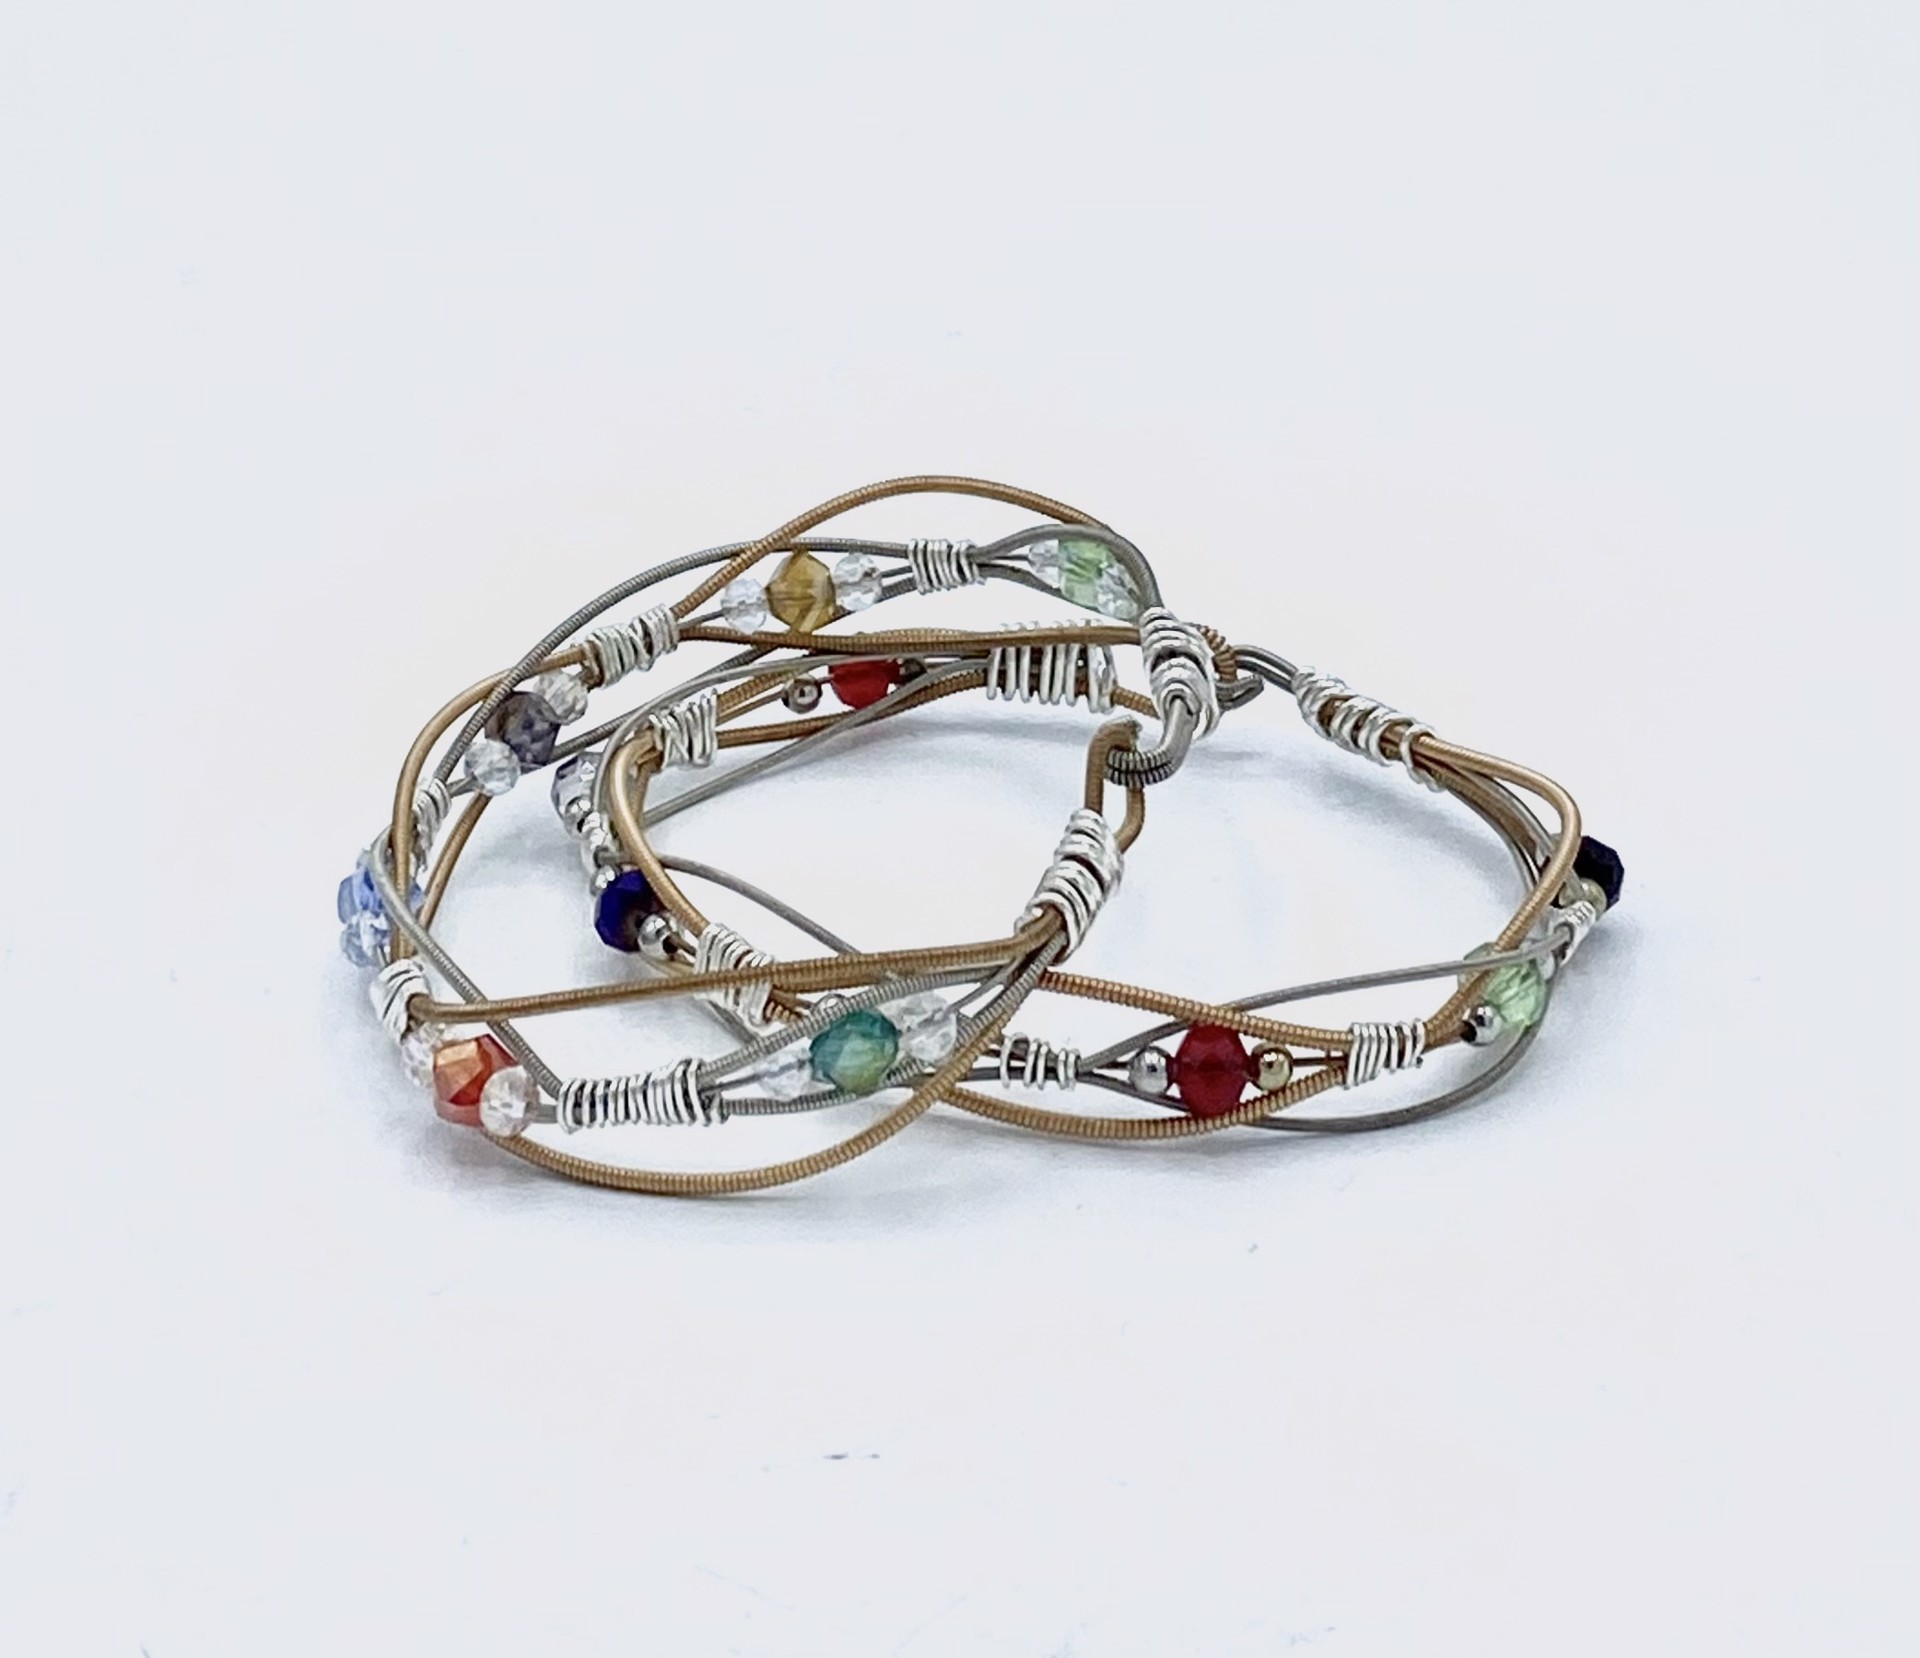 Guitar String Multicolor Bead Bracelet by String Thing Designs